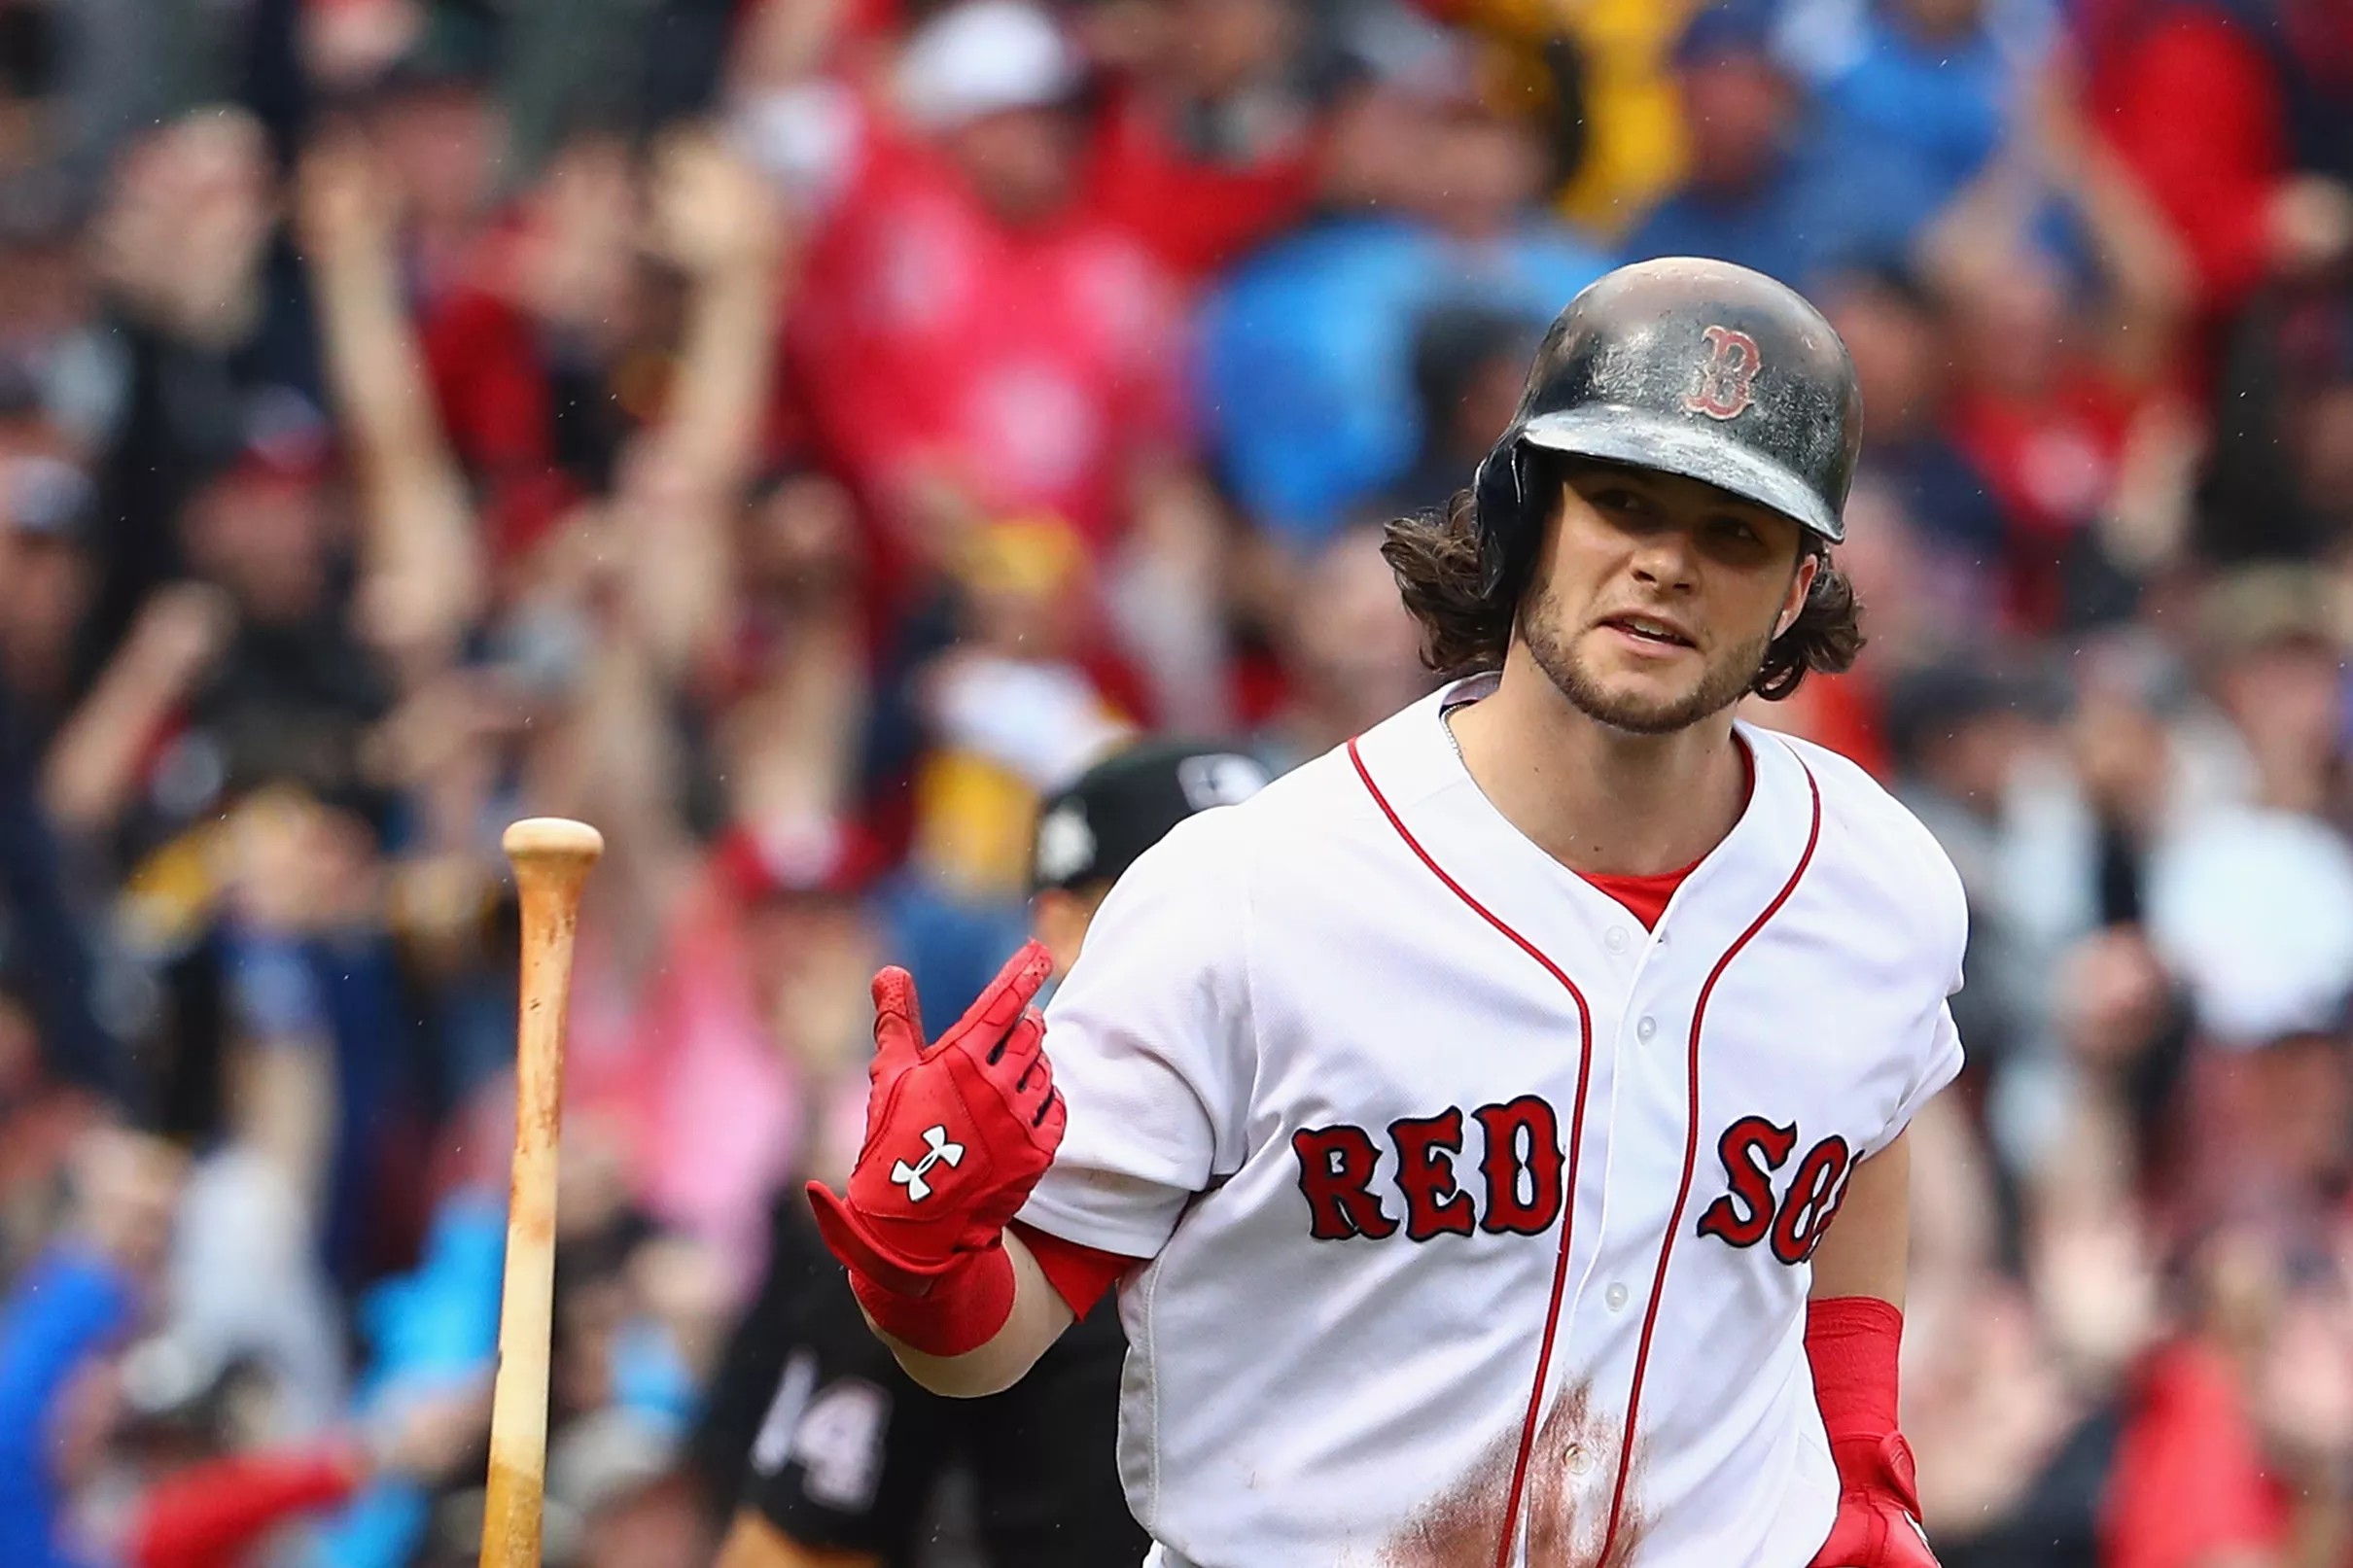 Andrew Benintendi finishes second in American League Rookie of the Year